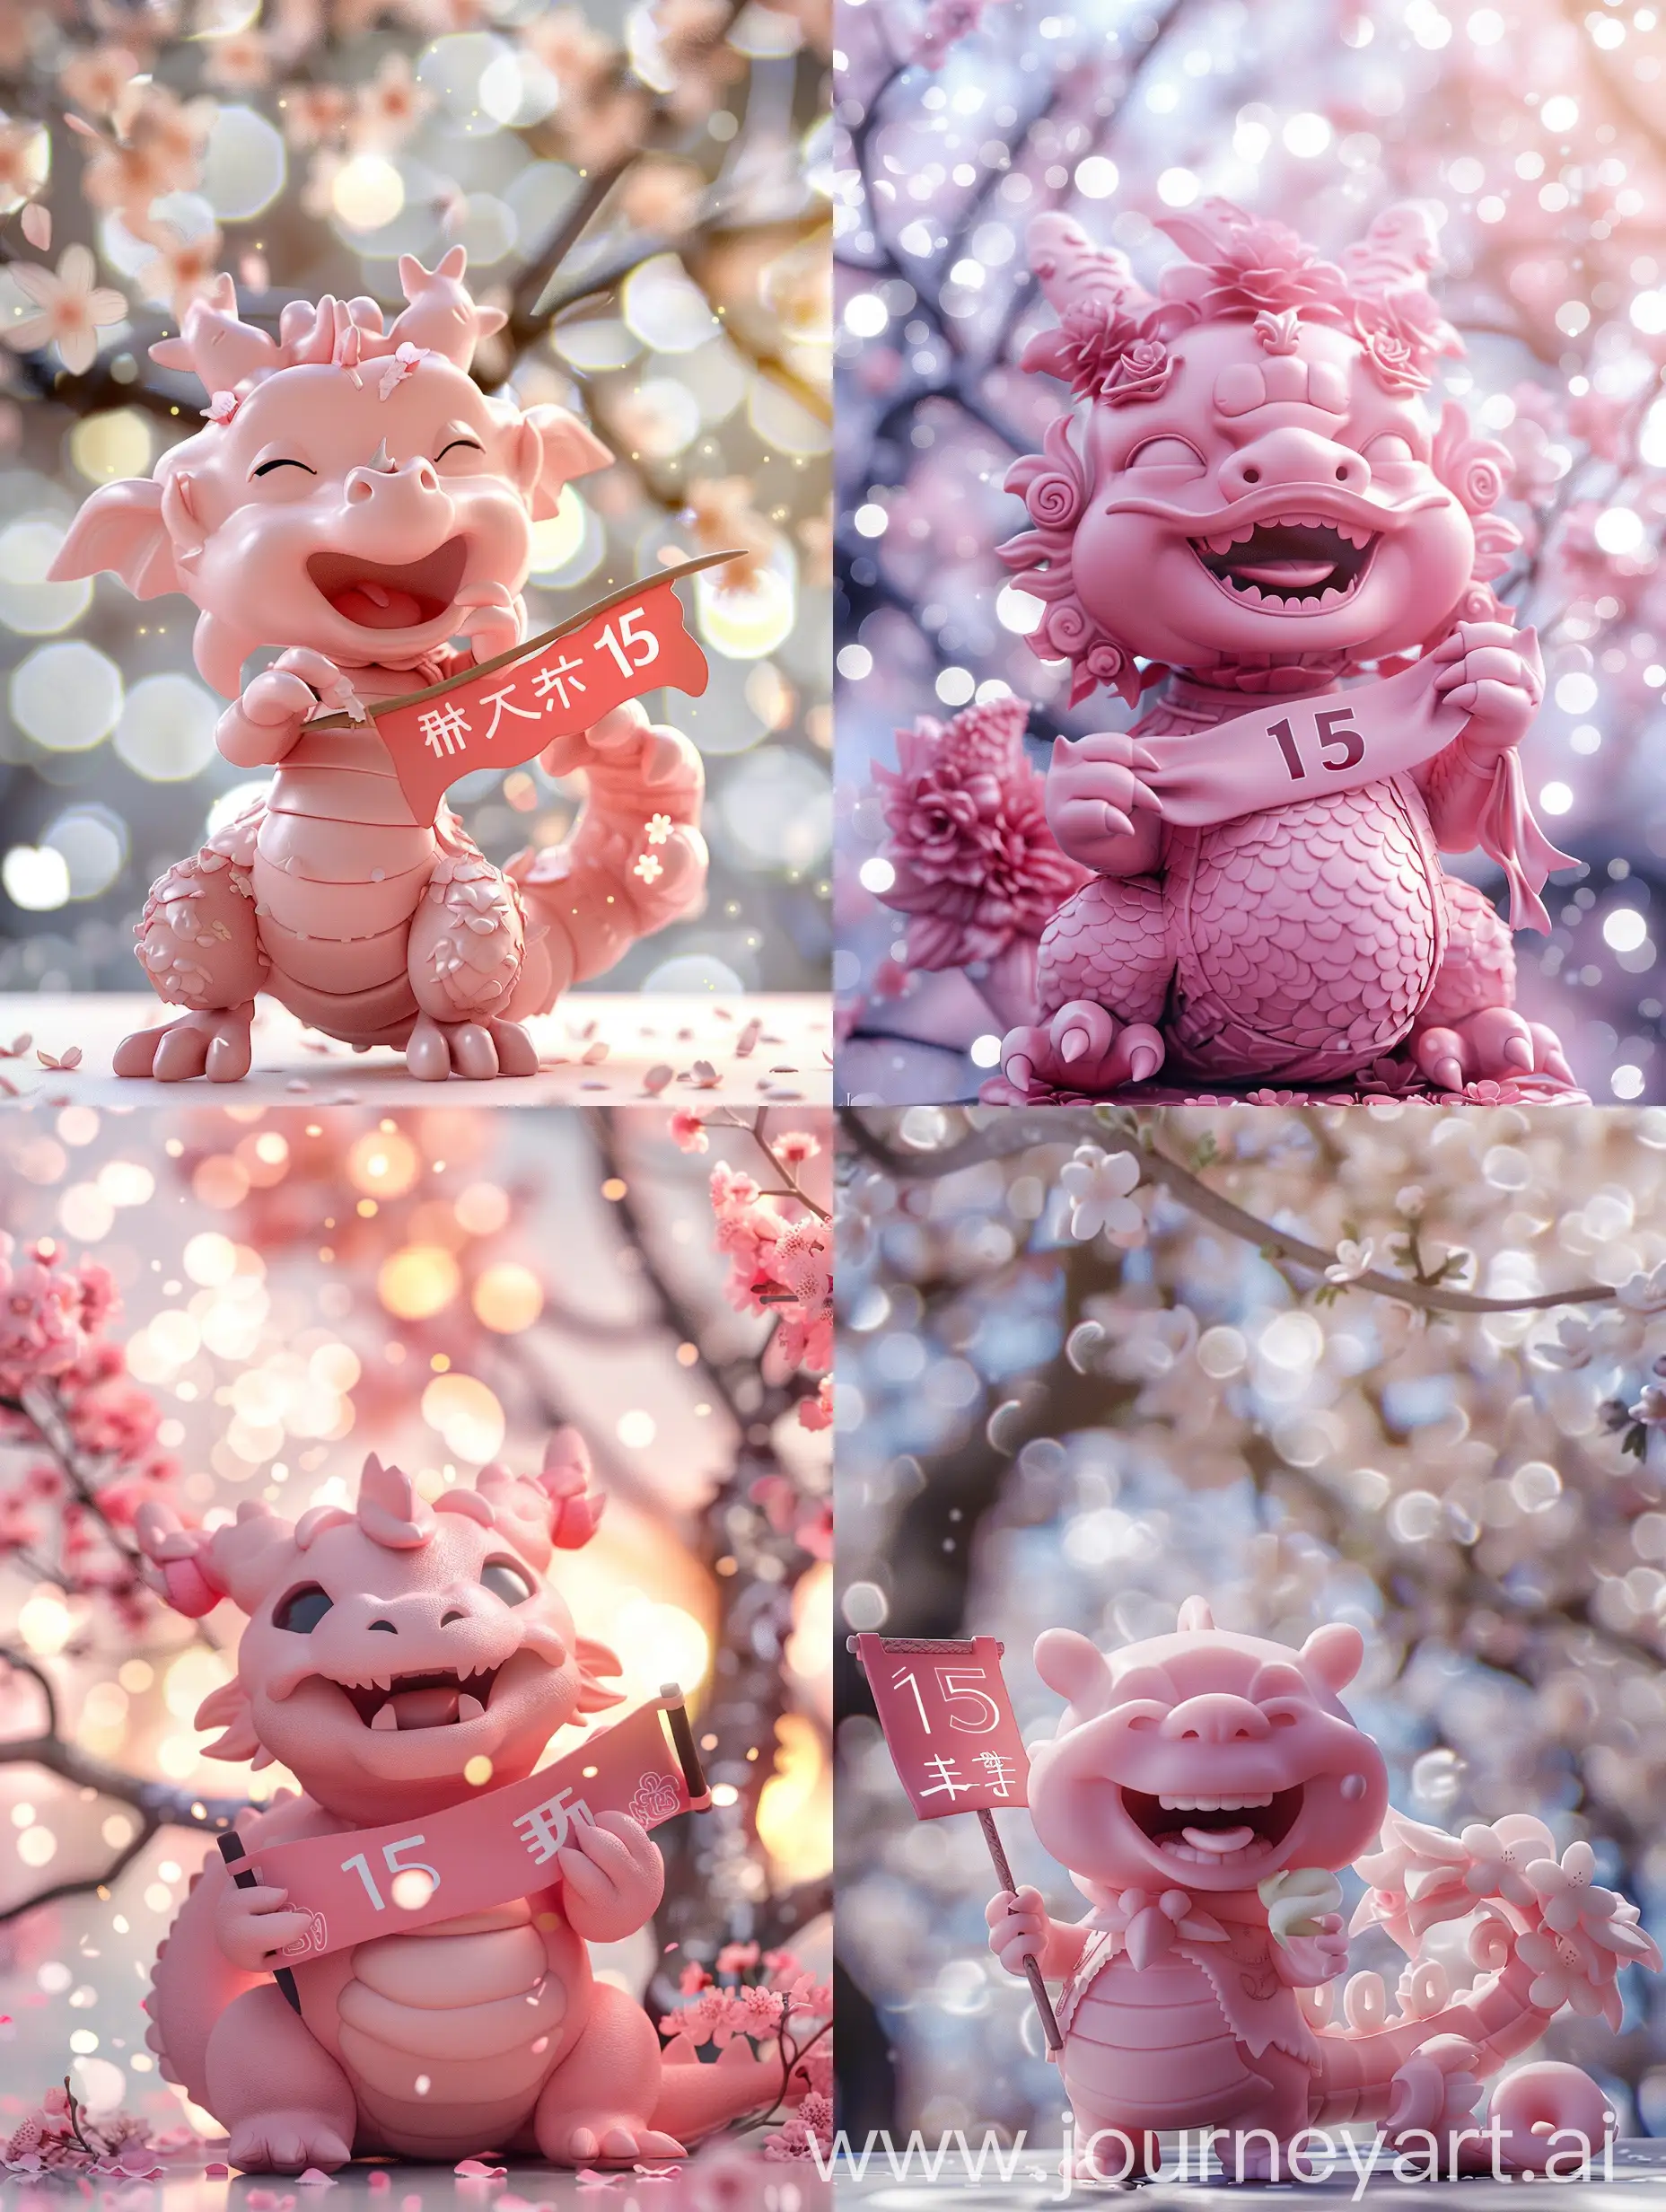 Cute pink 3d Chinese kid dragon with benign smile. Holds banner with number "15". Background spring blossoms bokeh